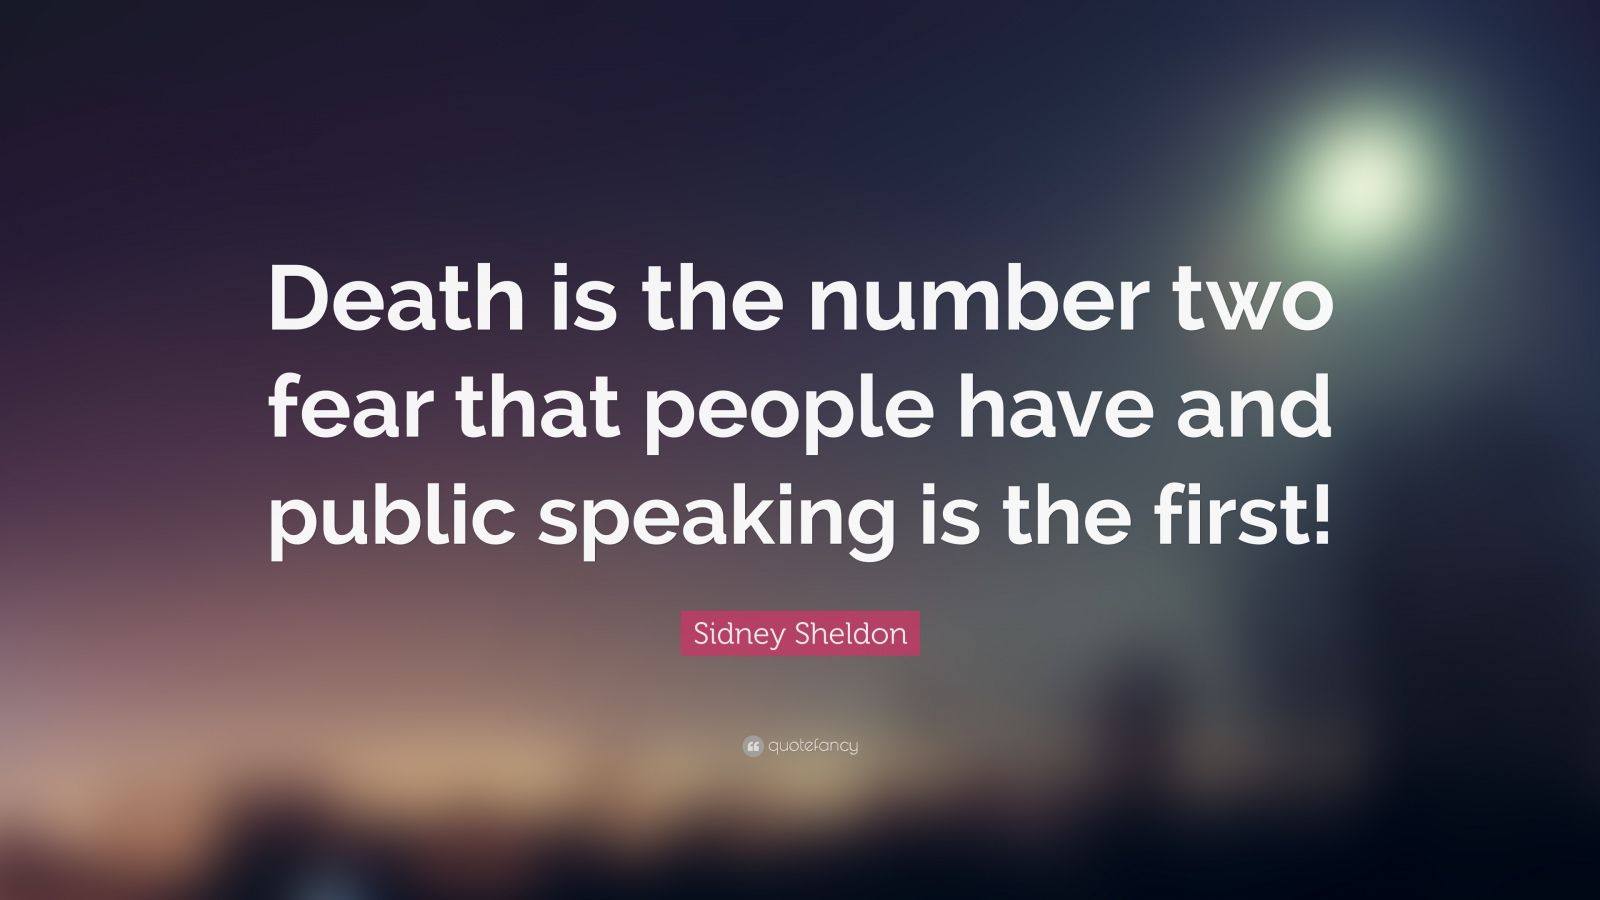 Sidney Sheldon Quote: “Death is the number two fear that people have